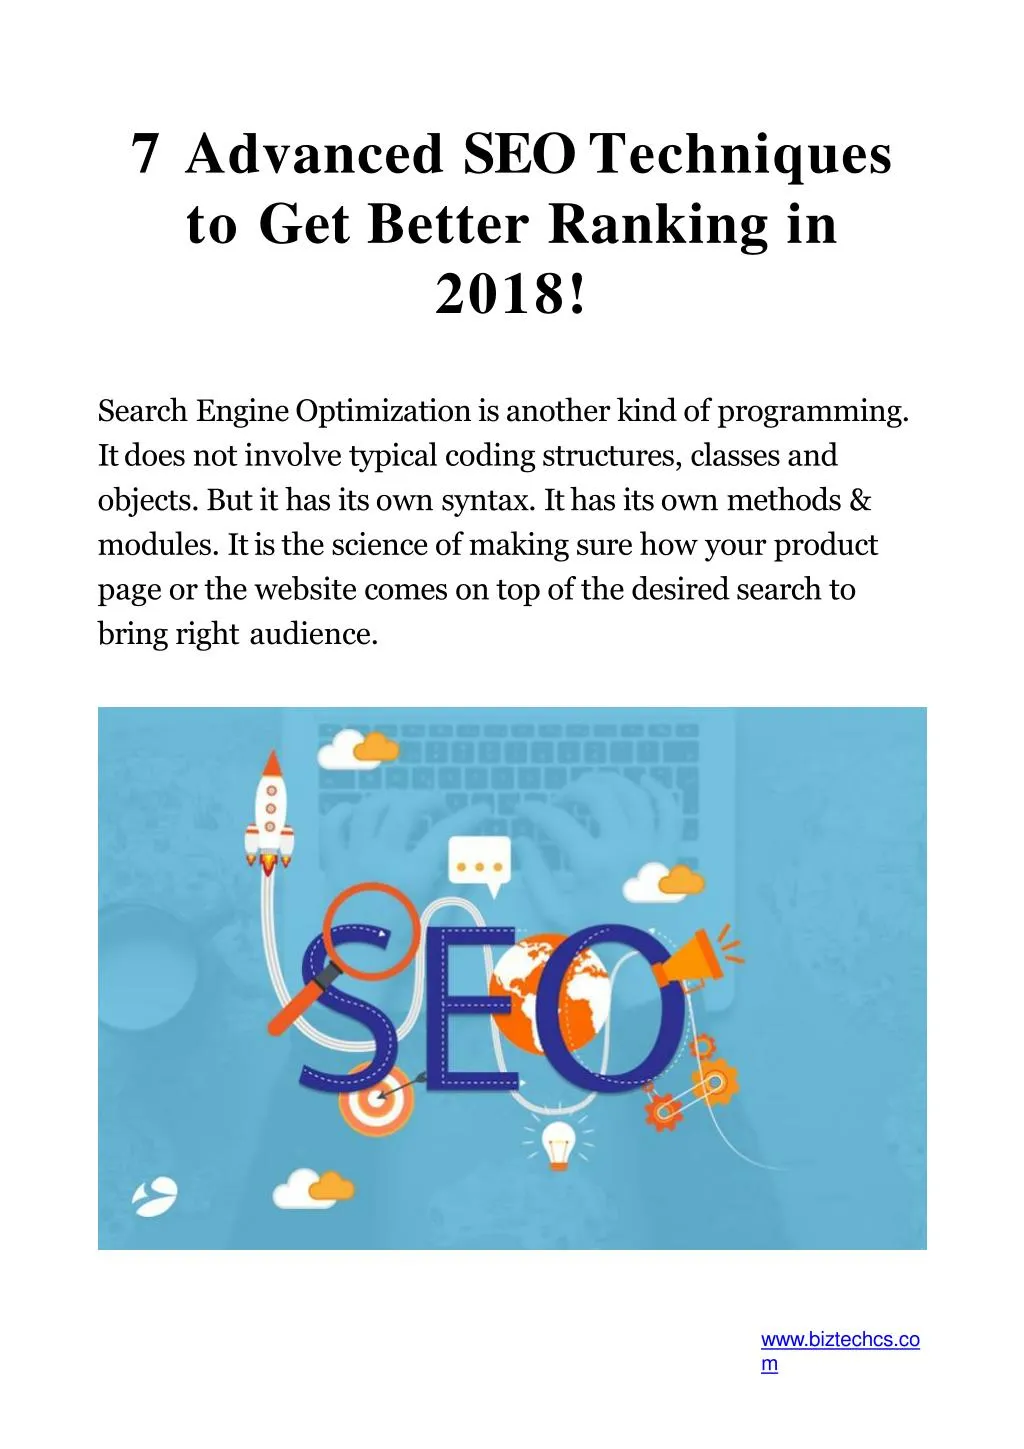 7 advanced seo techniques to get better ranking in 2018